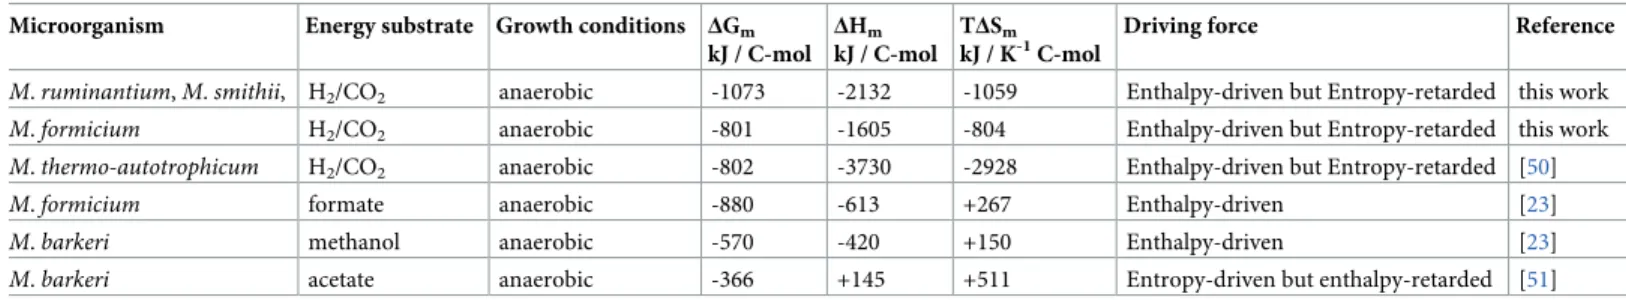 Table 1 shows the thermodynamic properties per mole of biomass formed during methano- methano-genesis of M